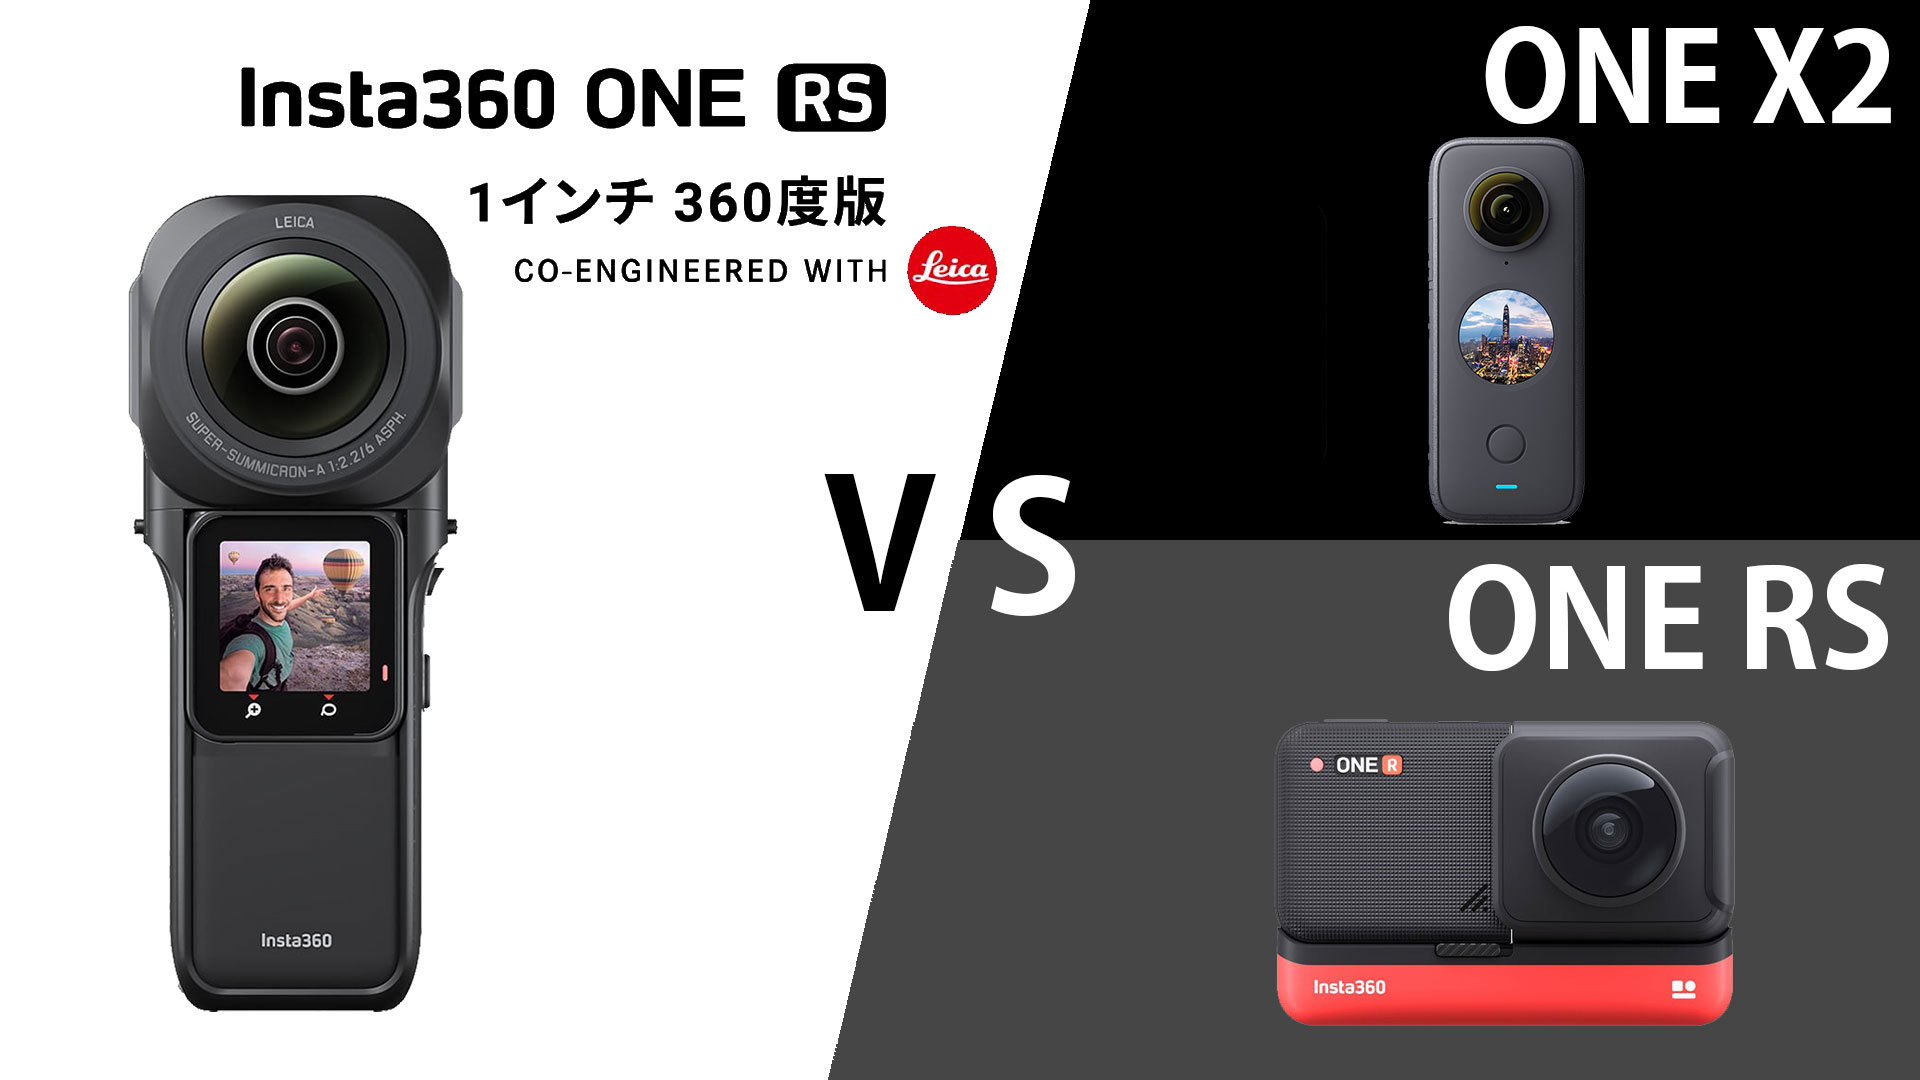 Insta360】 ONE RS 1インチ360度版 vs ONE X2 vs ONE RS 違いって